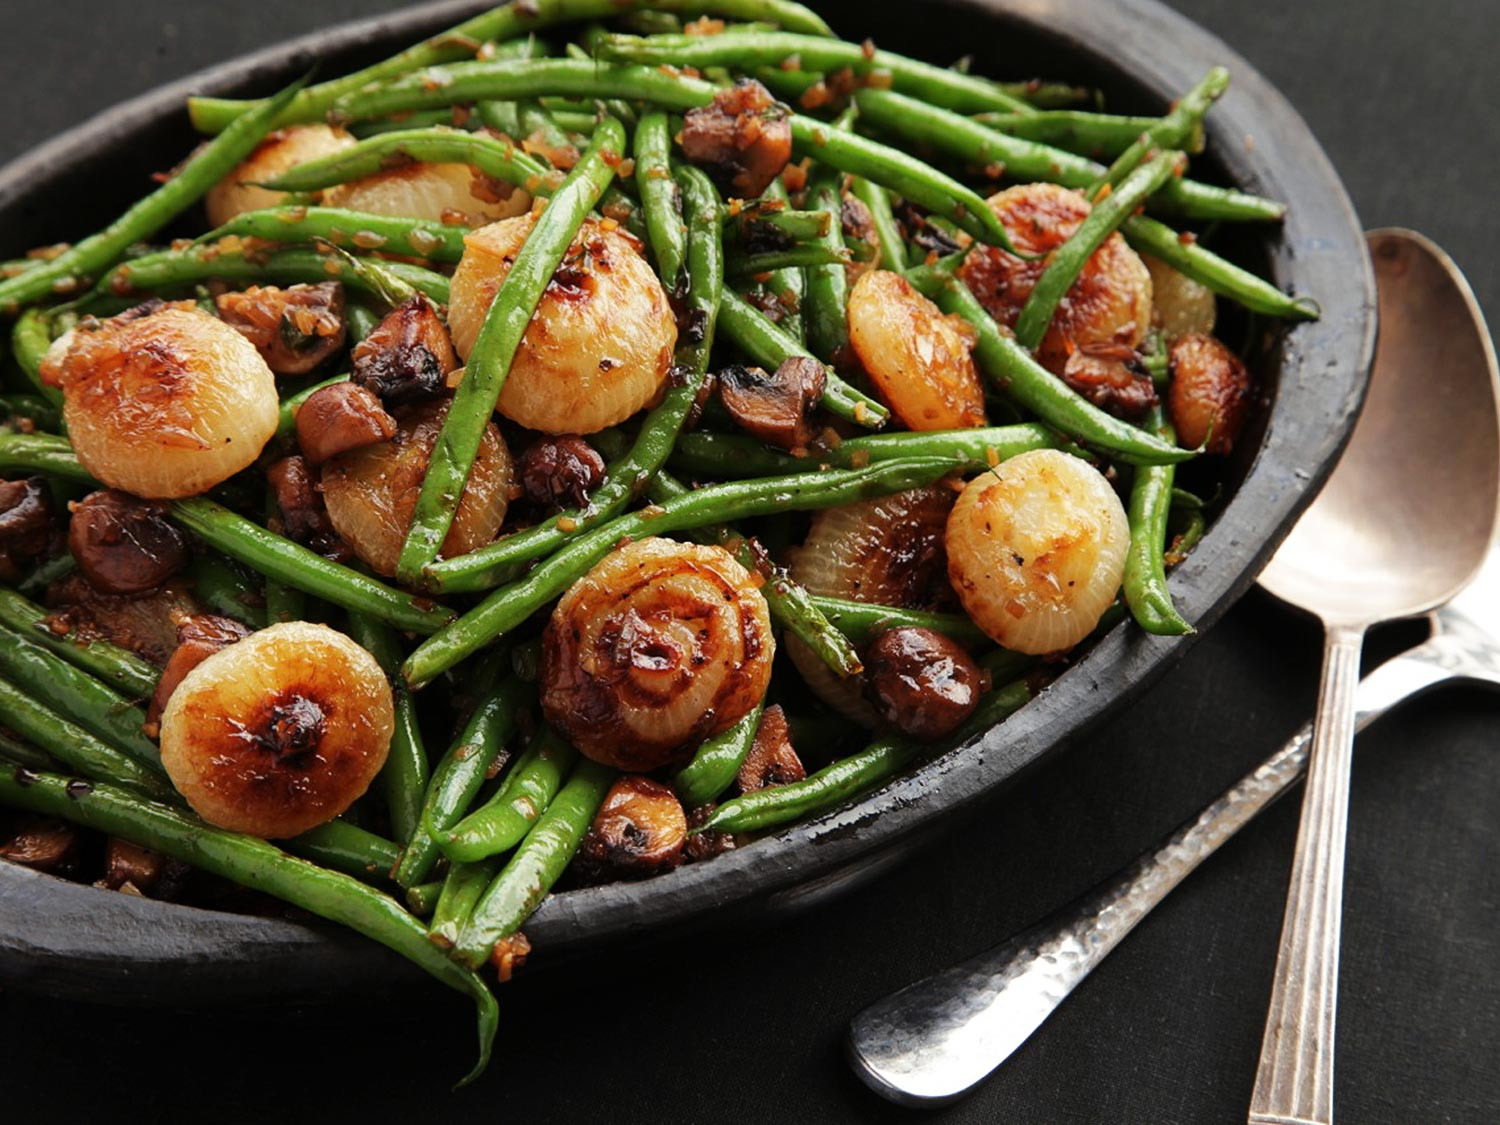 Green Bean And Mushroom Recipe
 The Food Lab Sautéed Green Beans With Mushrooms and